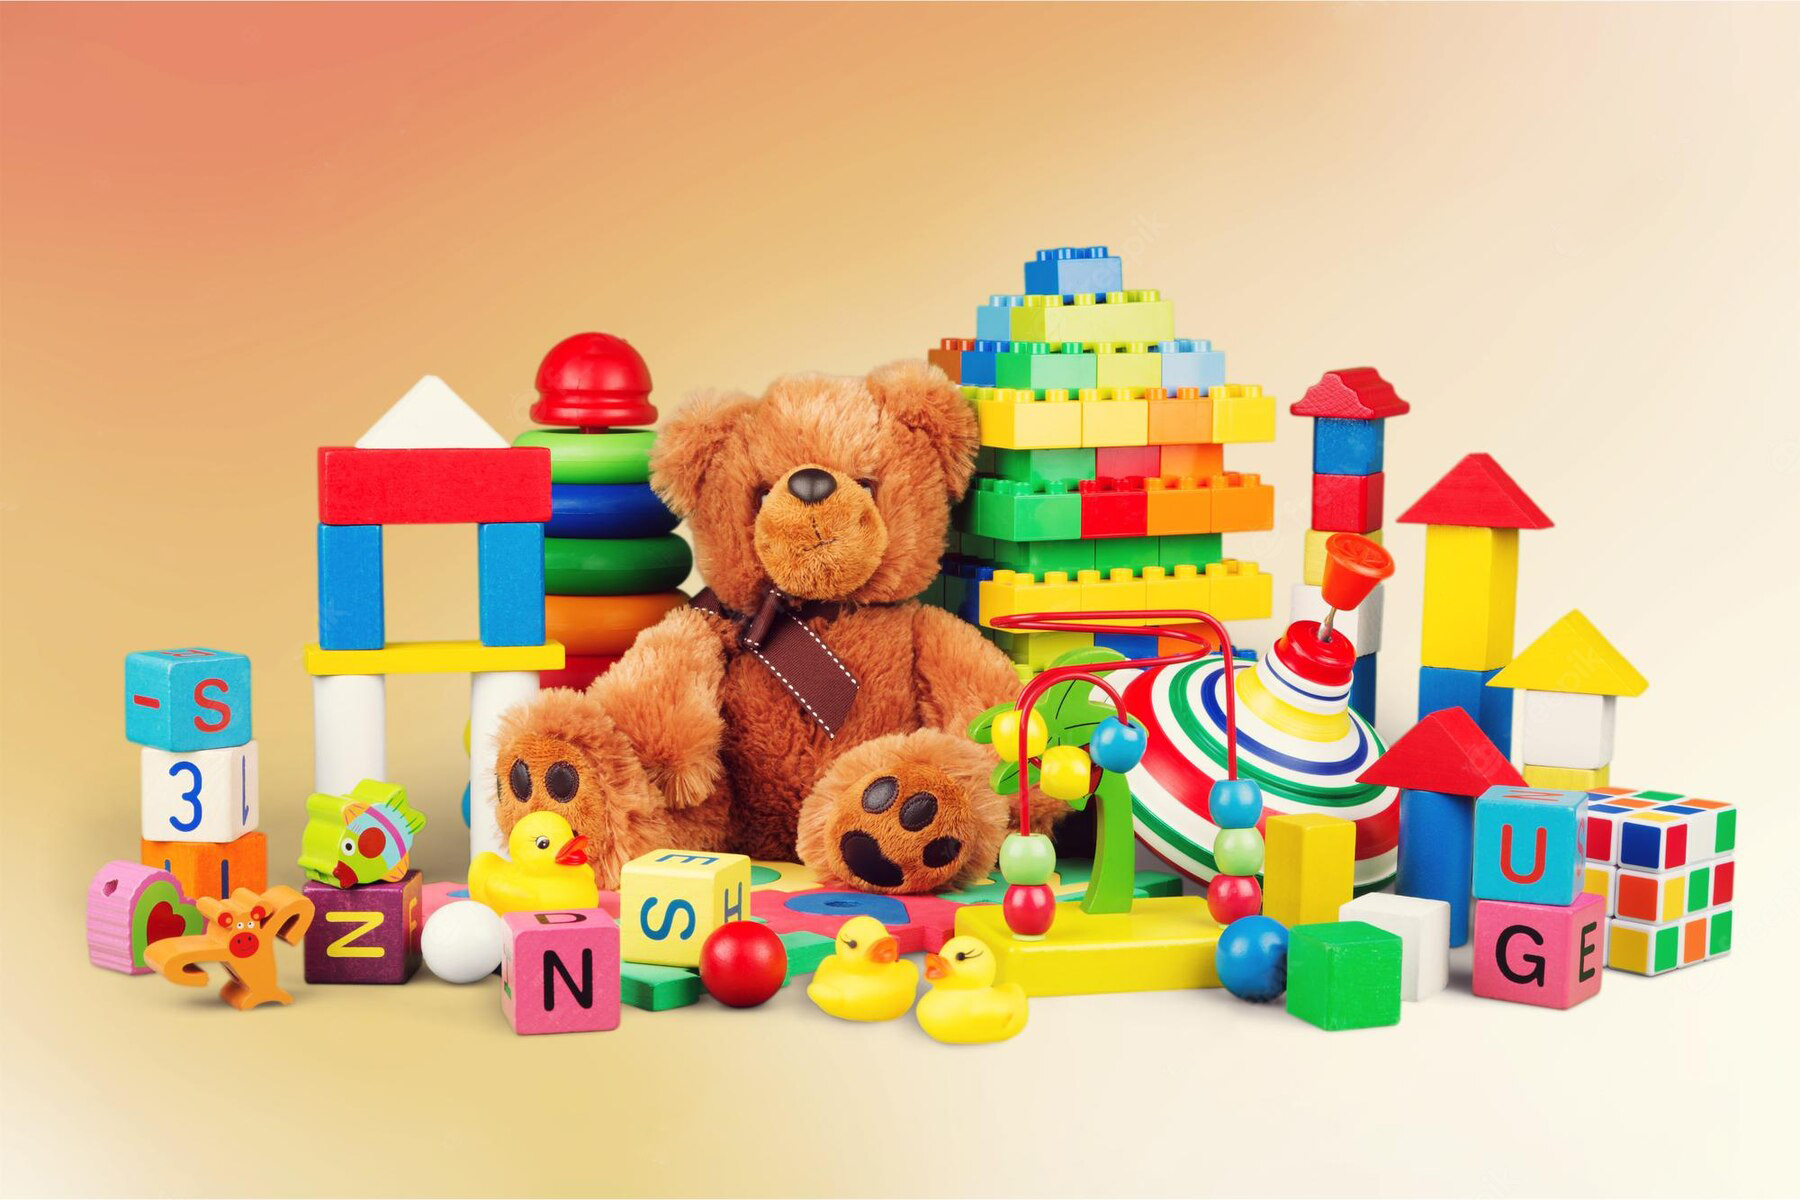 toys-collection-isolated-background_488220-27281